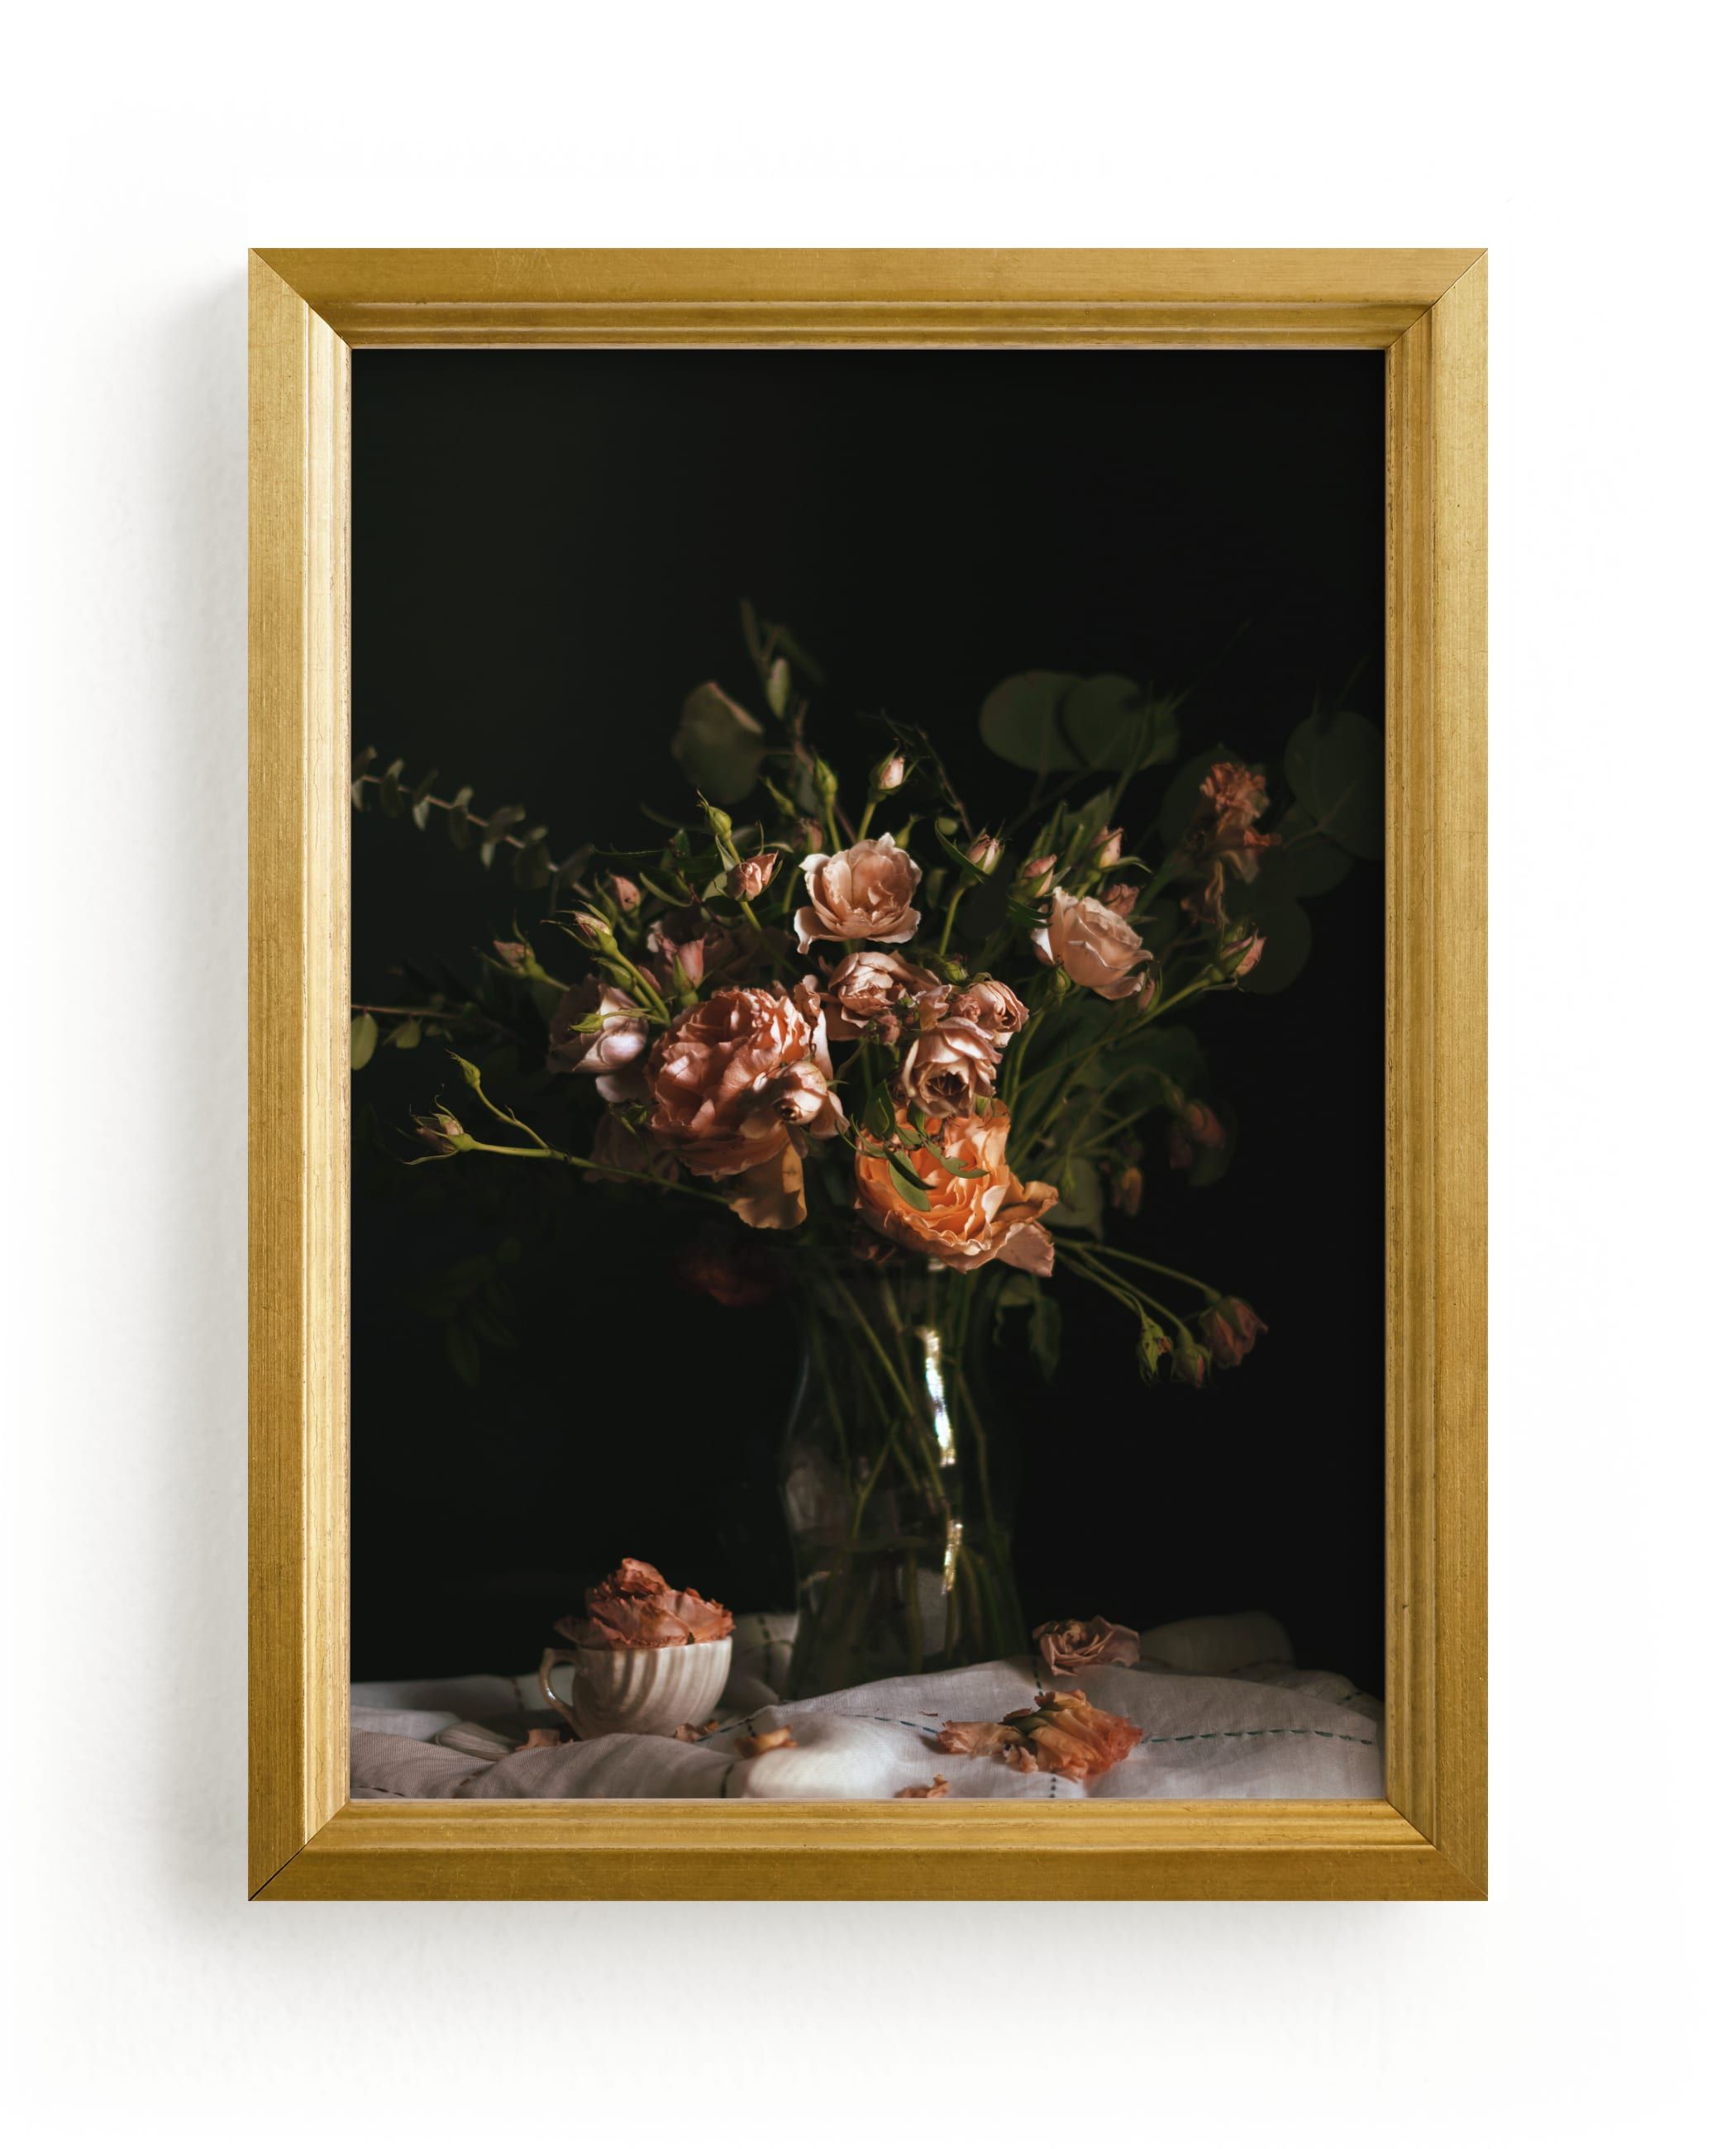 "Moody Floral Still Life" - Photography Limited Edition Art Print by Katie Buckman. | Minted